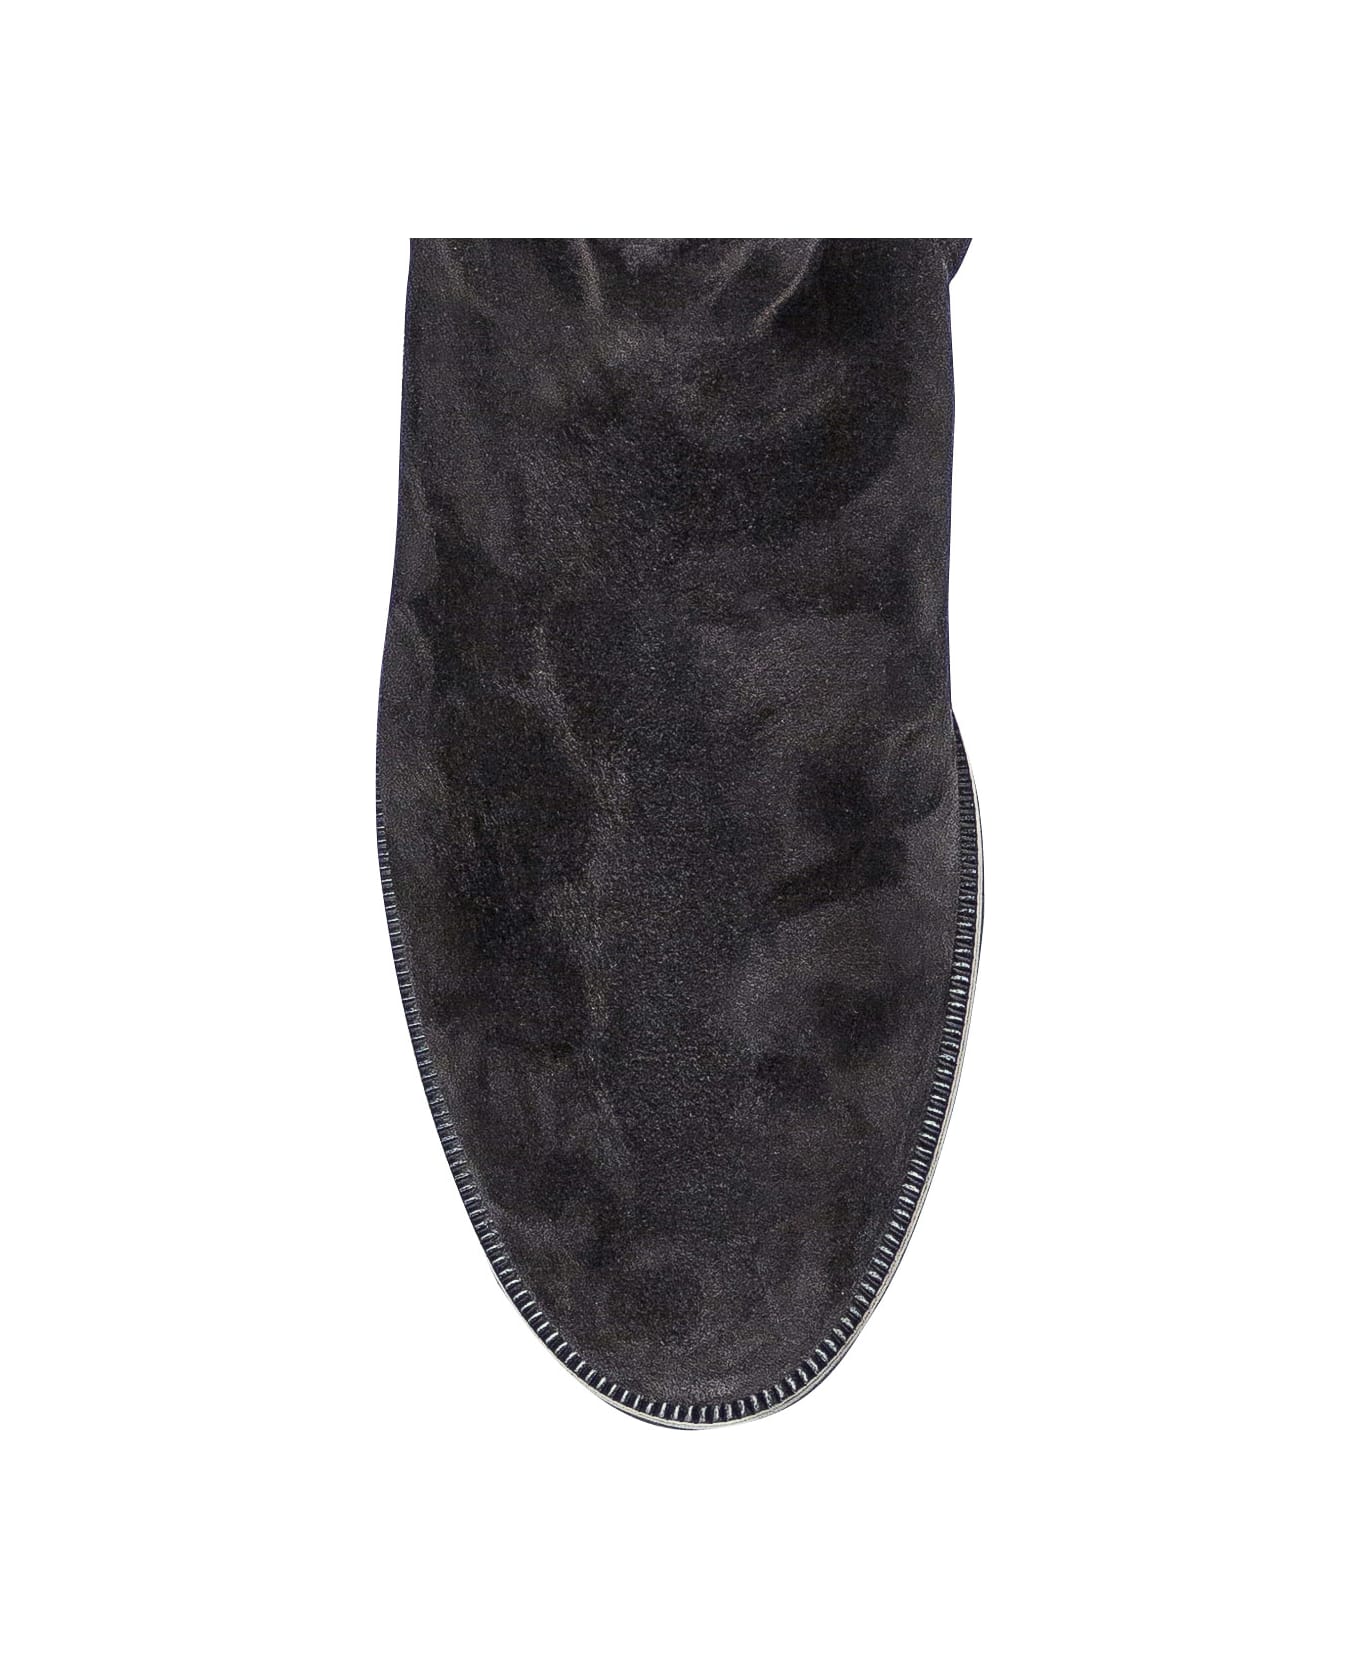 Maison Skorpios Stefania Boots In Suede Leather - BLACK ブーツ